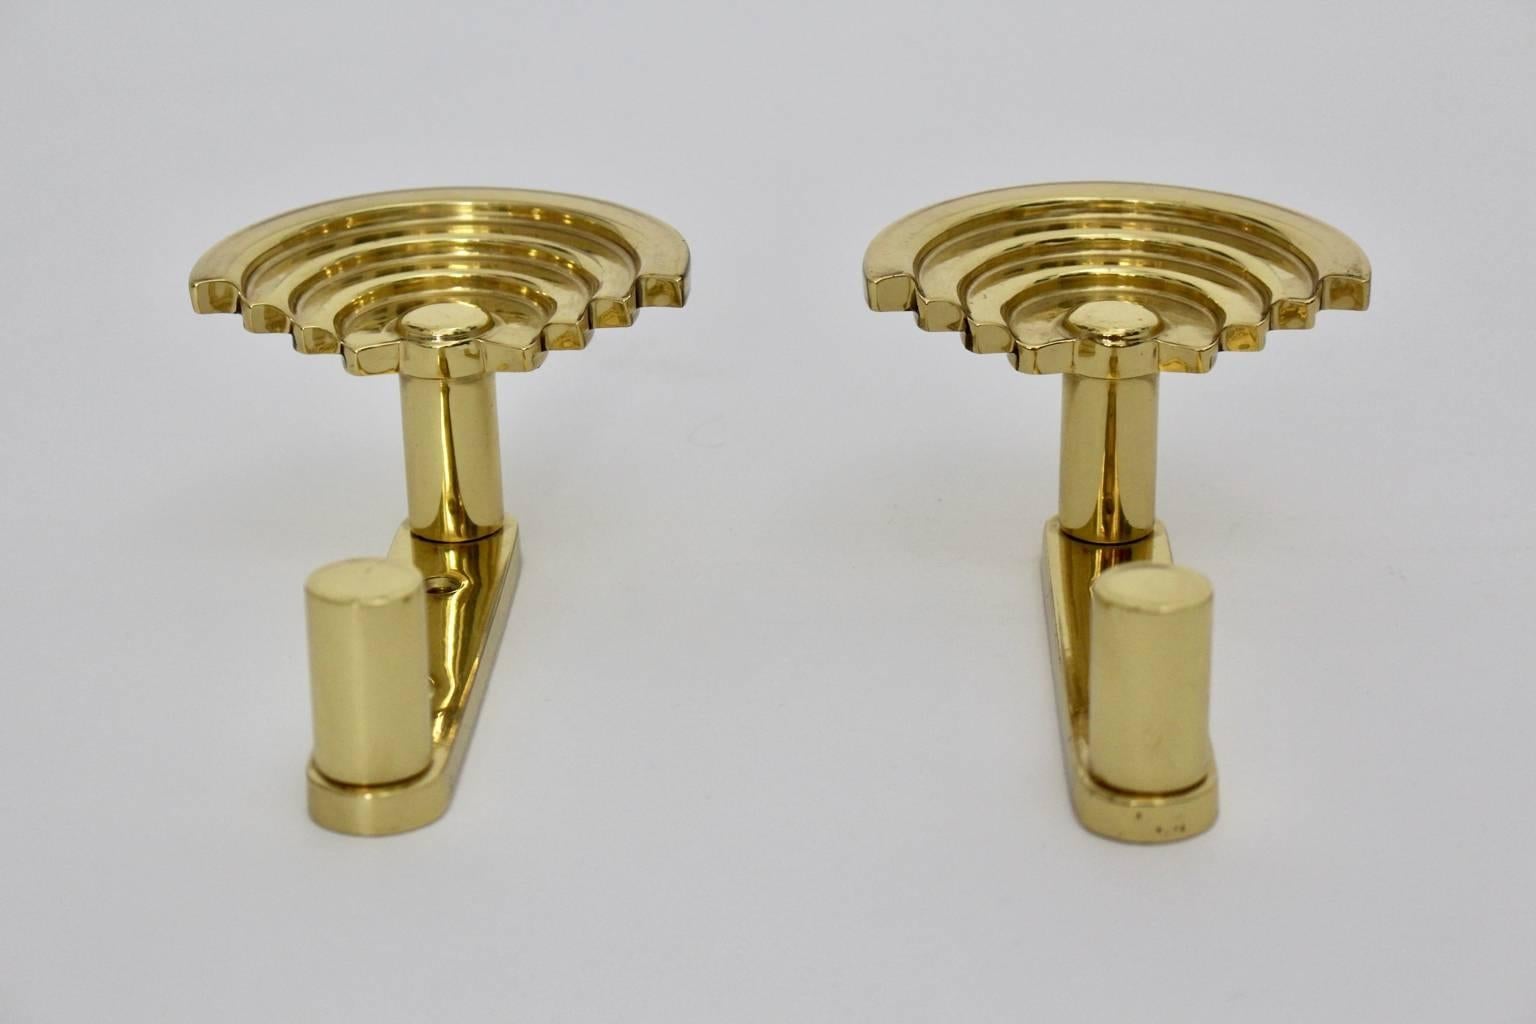 This pair of coat hooks Quattro SE 314 designed by Ettore Sottsass Associati and manufactured by Valli & Valli circa 1985 are very rare.
The coat hooks were made of solid polished brass and are in best condition.
These coat hooks, which are shaped